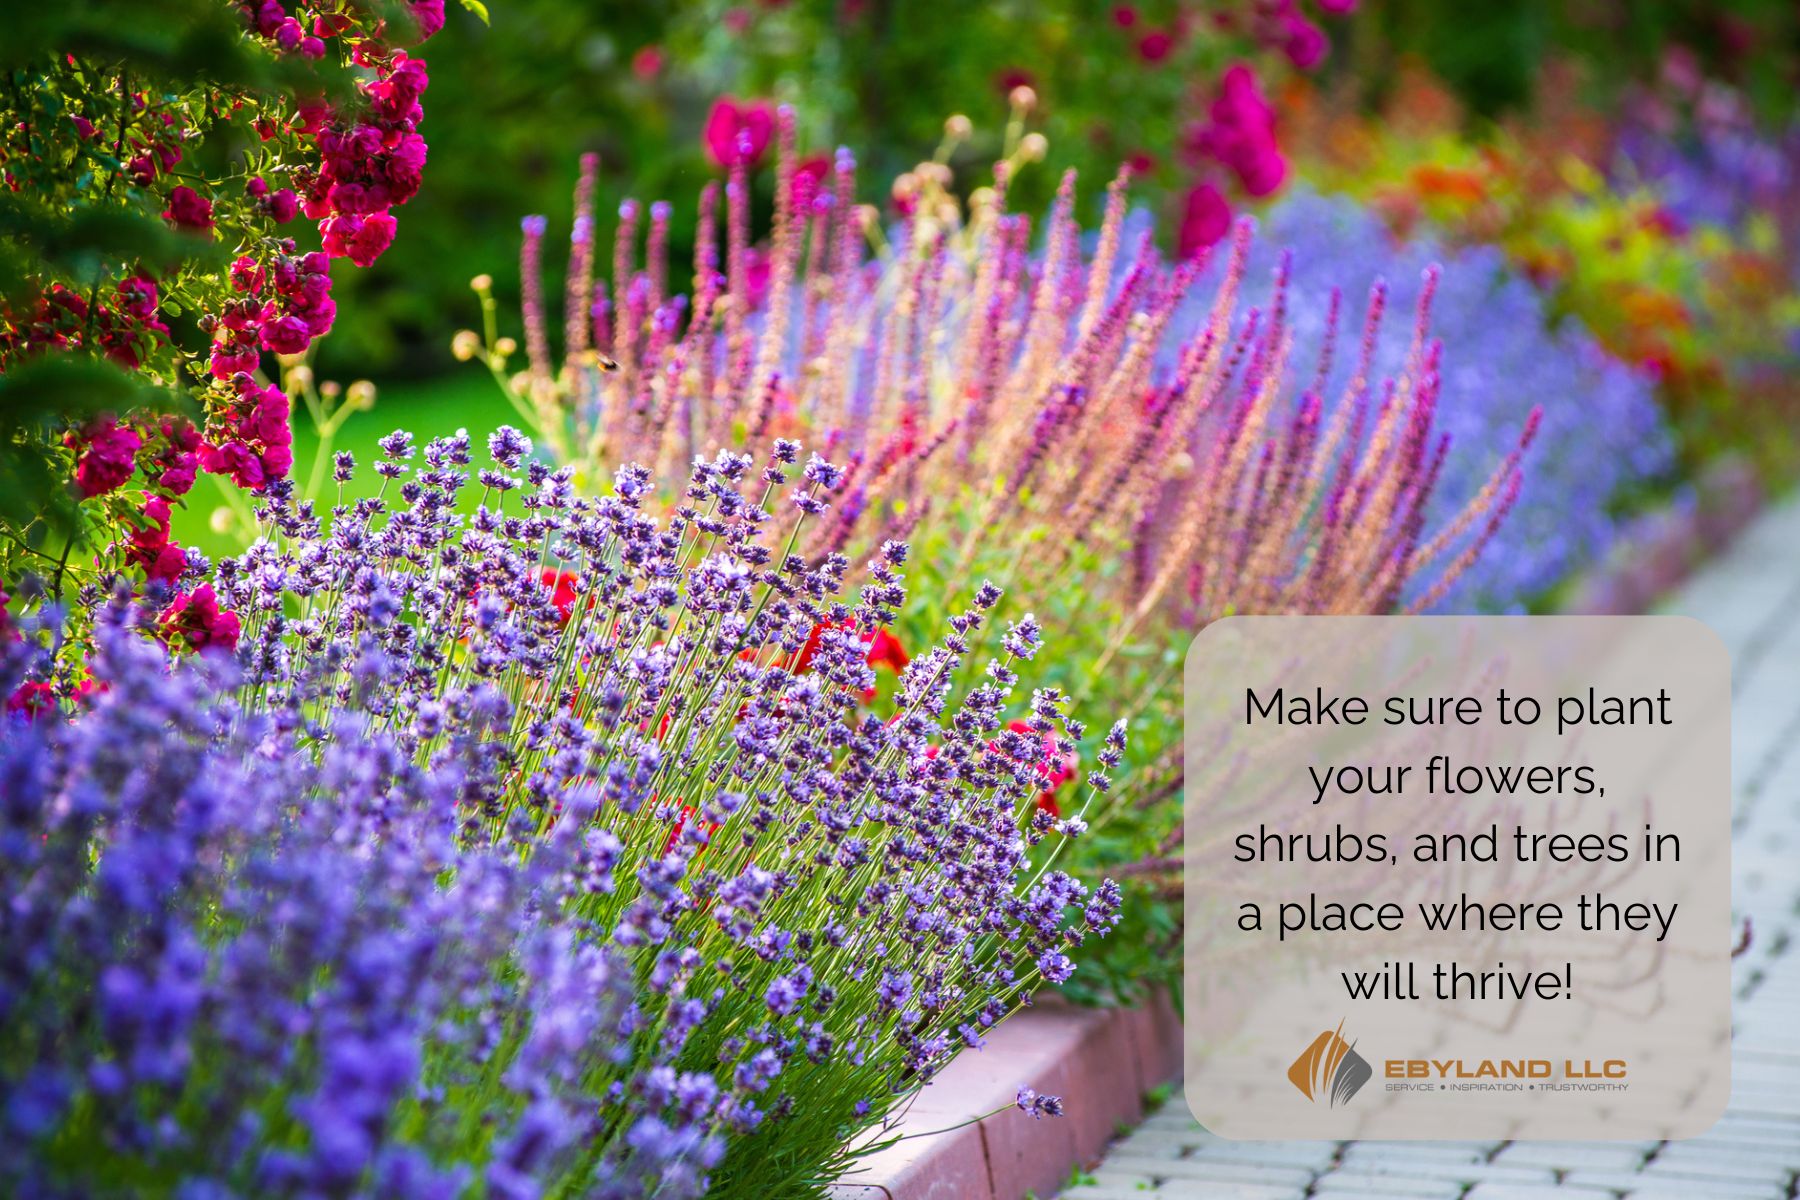 A vibrant garden with colorful flowers and shrubs along a paved pathway. Text overlay reads, "Make sure to plant your flowers, shrubs, and trees in a place where they will thrive!" with EBYLAND LLC logo.